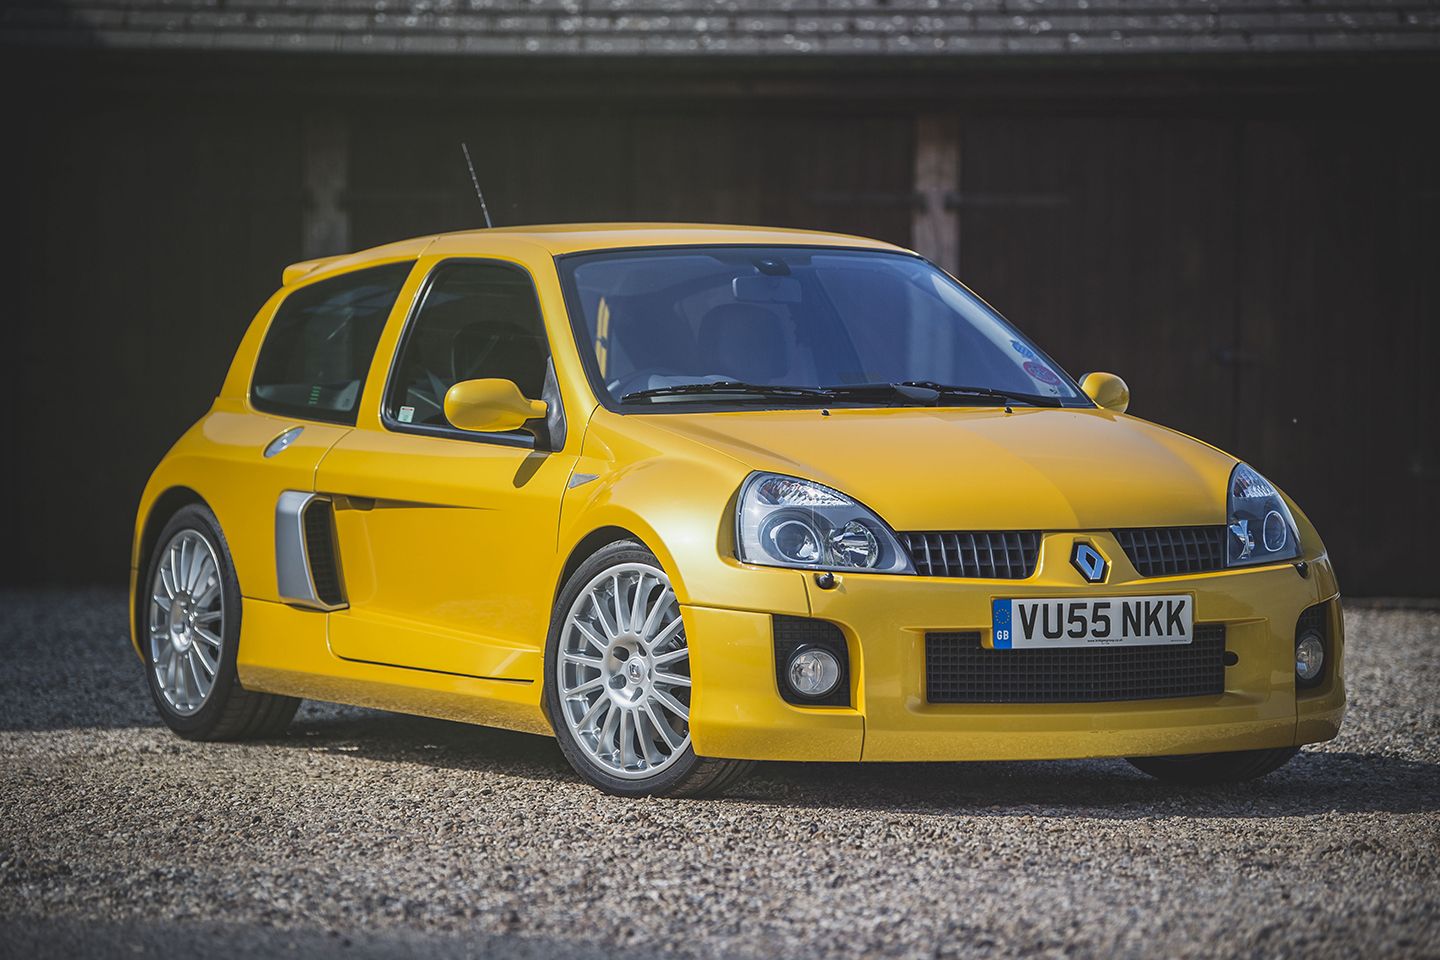  Renault Clio Cup 2 Racecar REDUCED PRICE